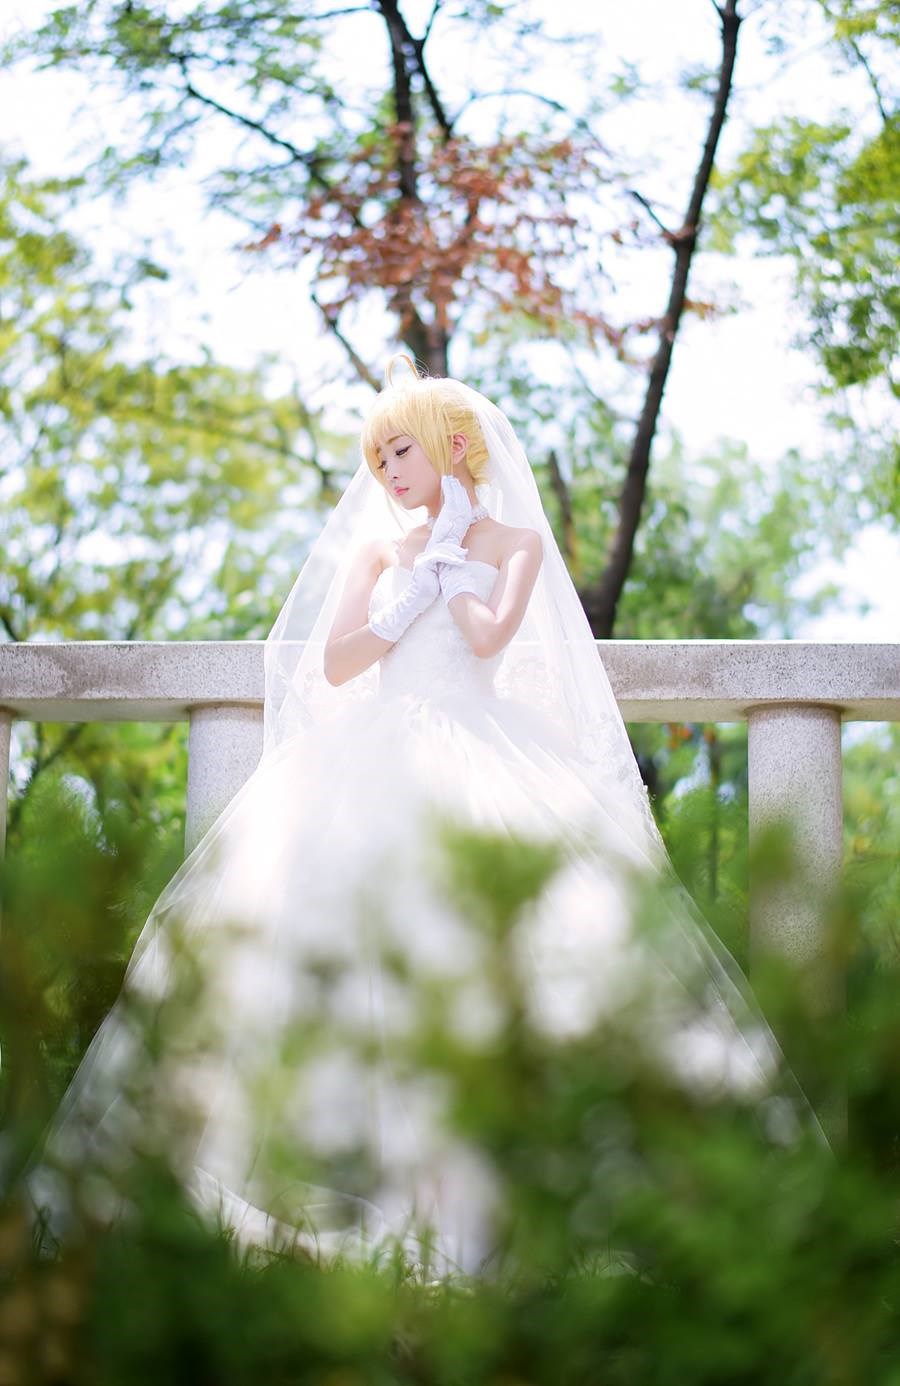 Saber Cos-Cosplay world Coser